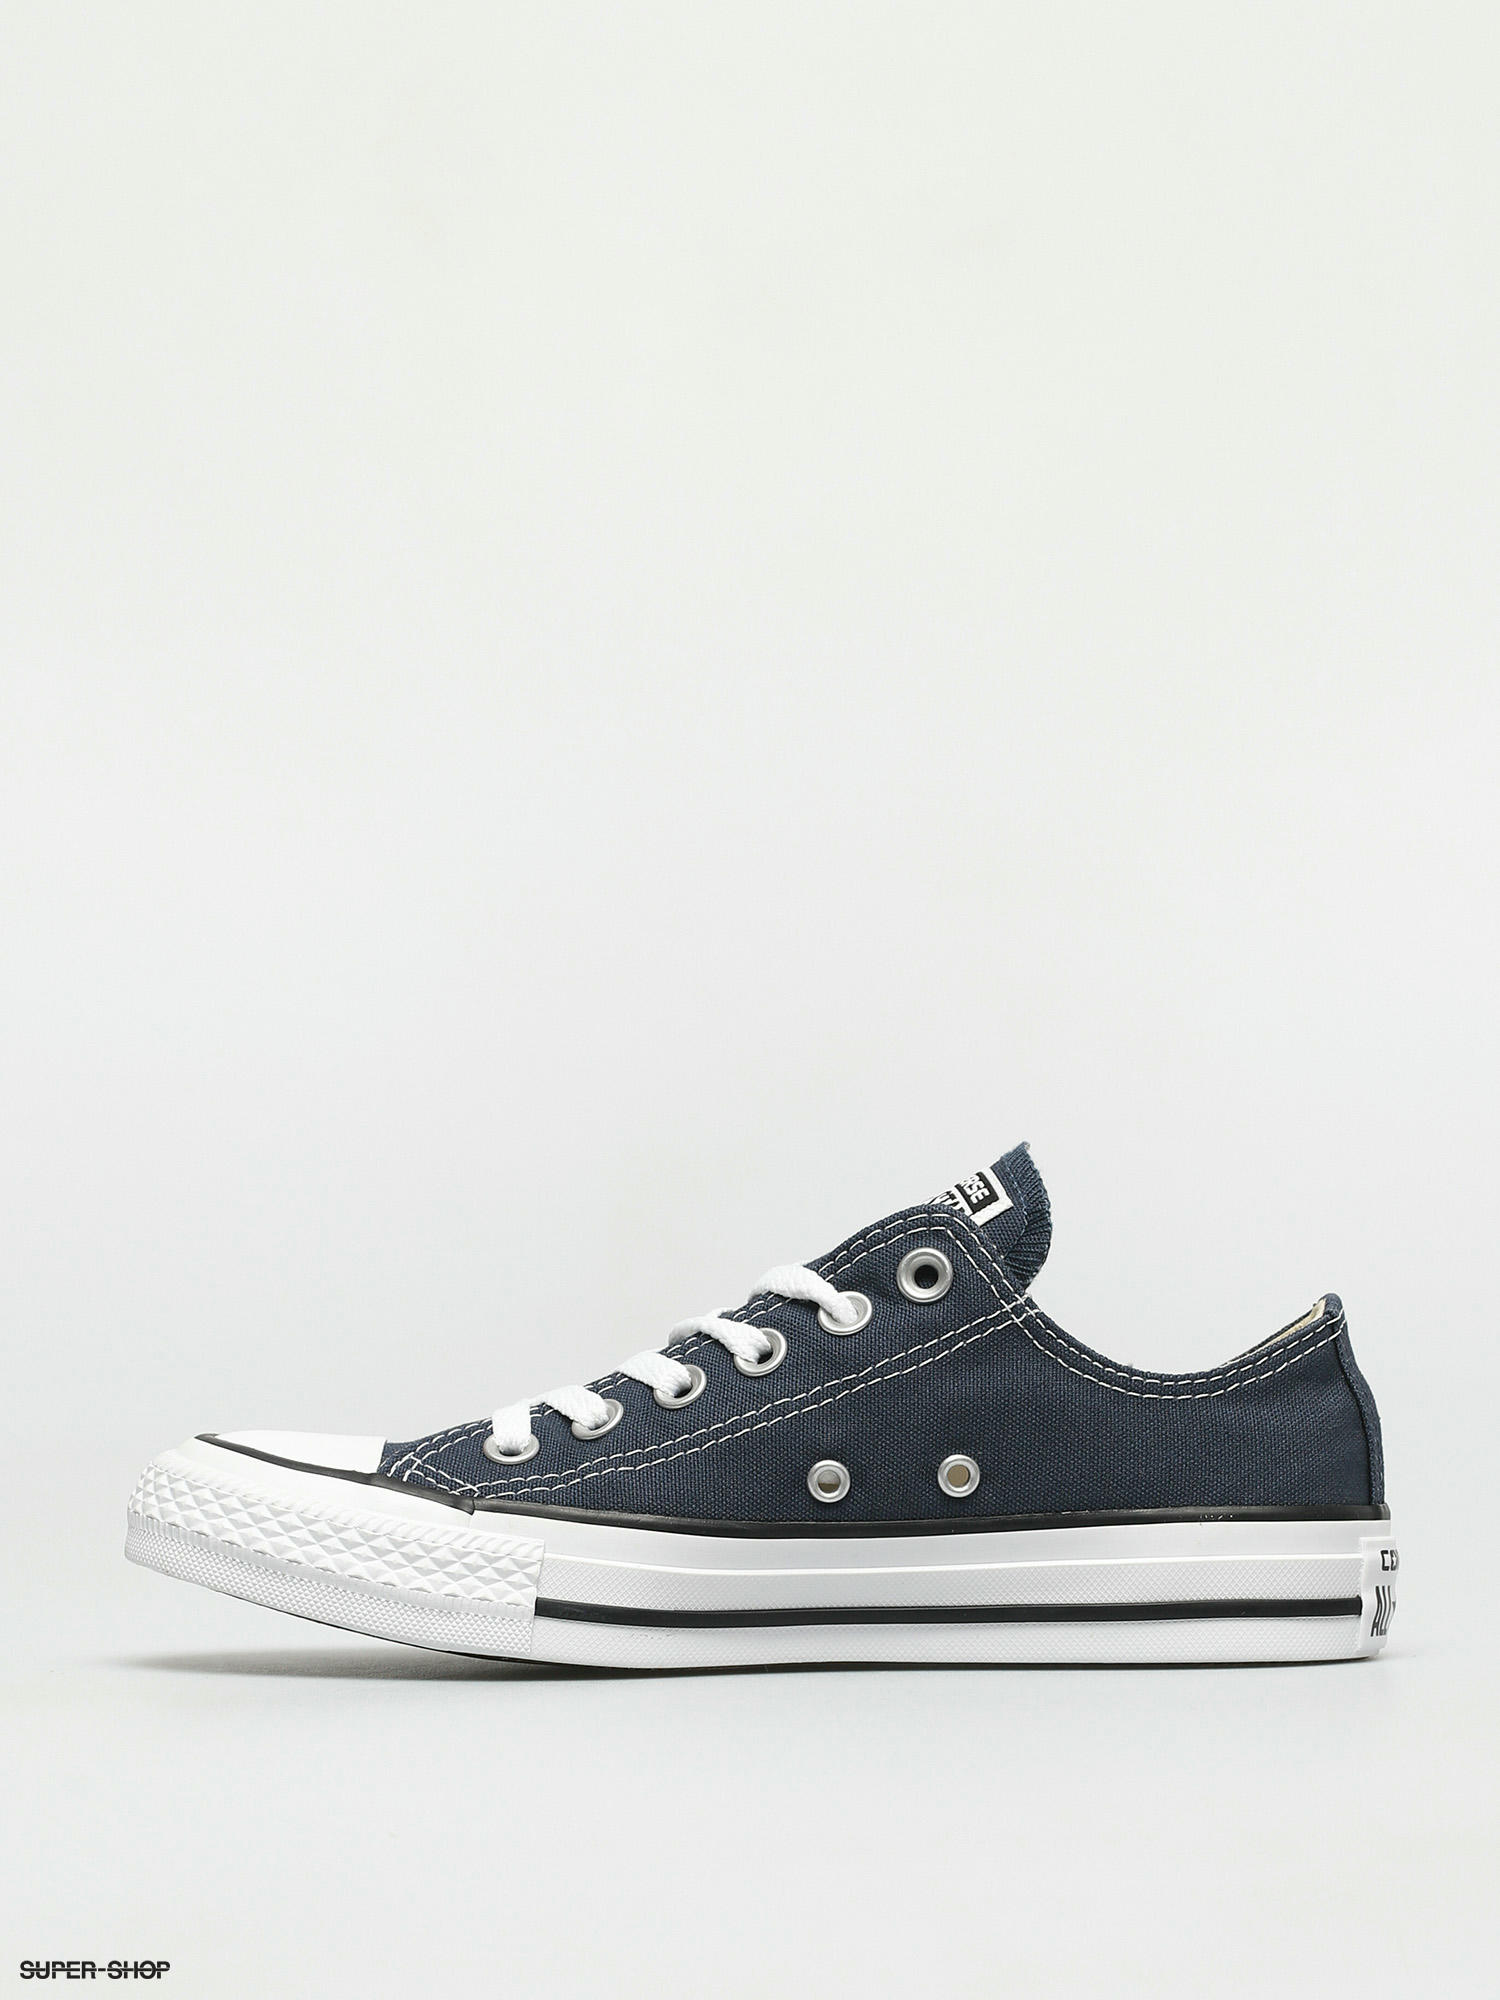 converse all star ox shoes navy